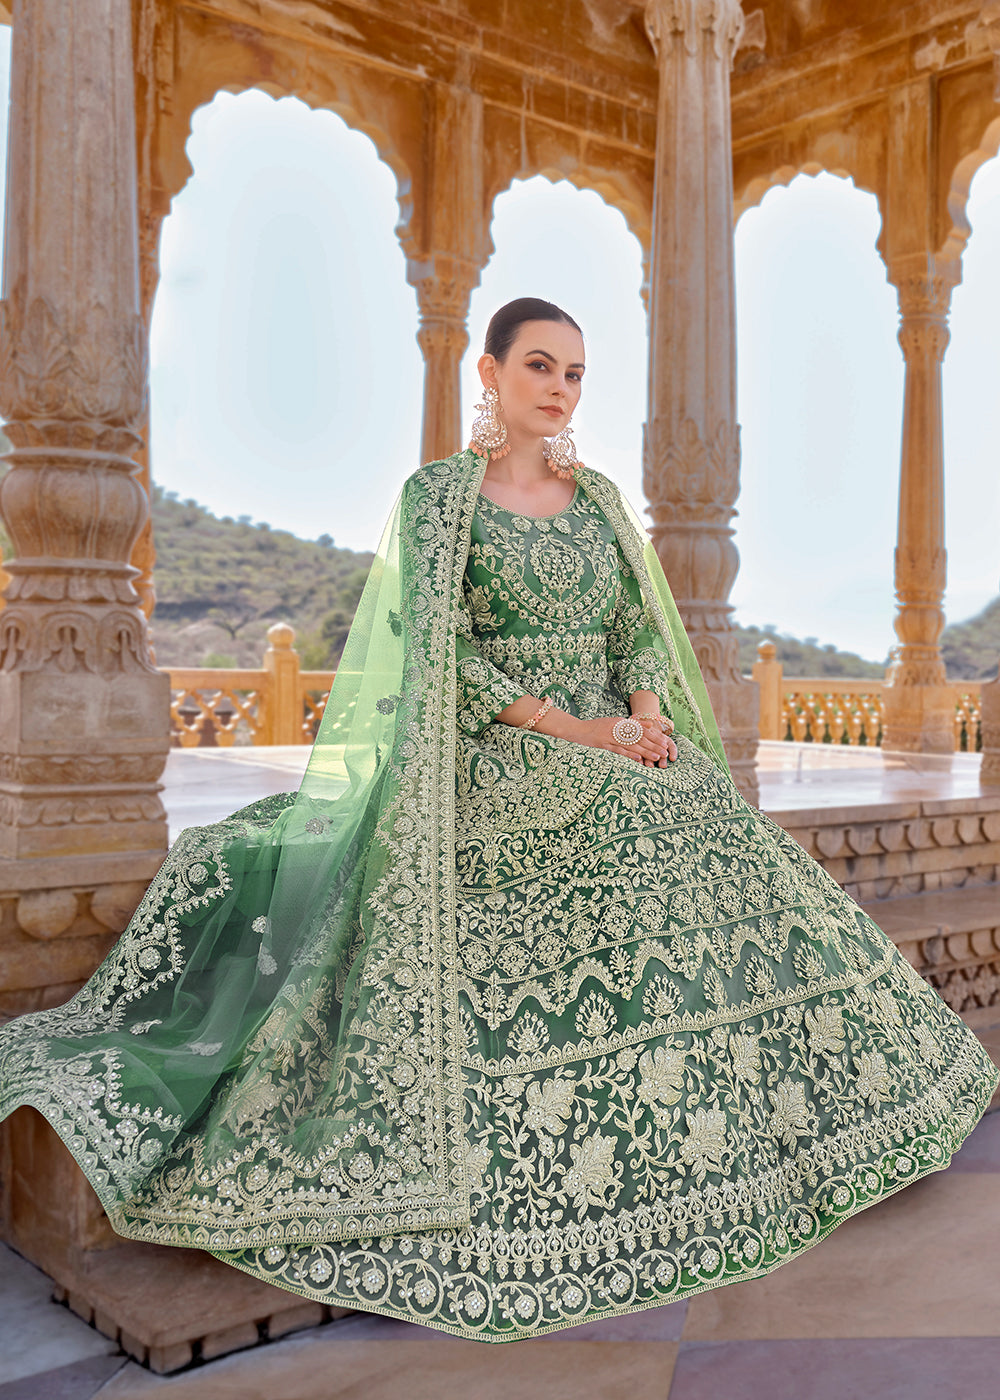 Buy Now Mint Green Front & Back Stone Embroidered Wedding Anarkali Suit Online in USA, UK, Australia, New Zealand, Canada & Worldwide at Empress Clothing.